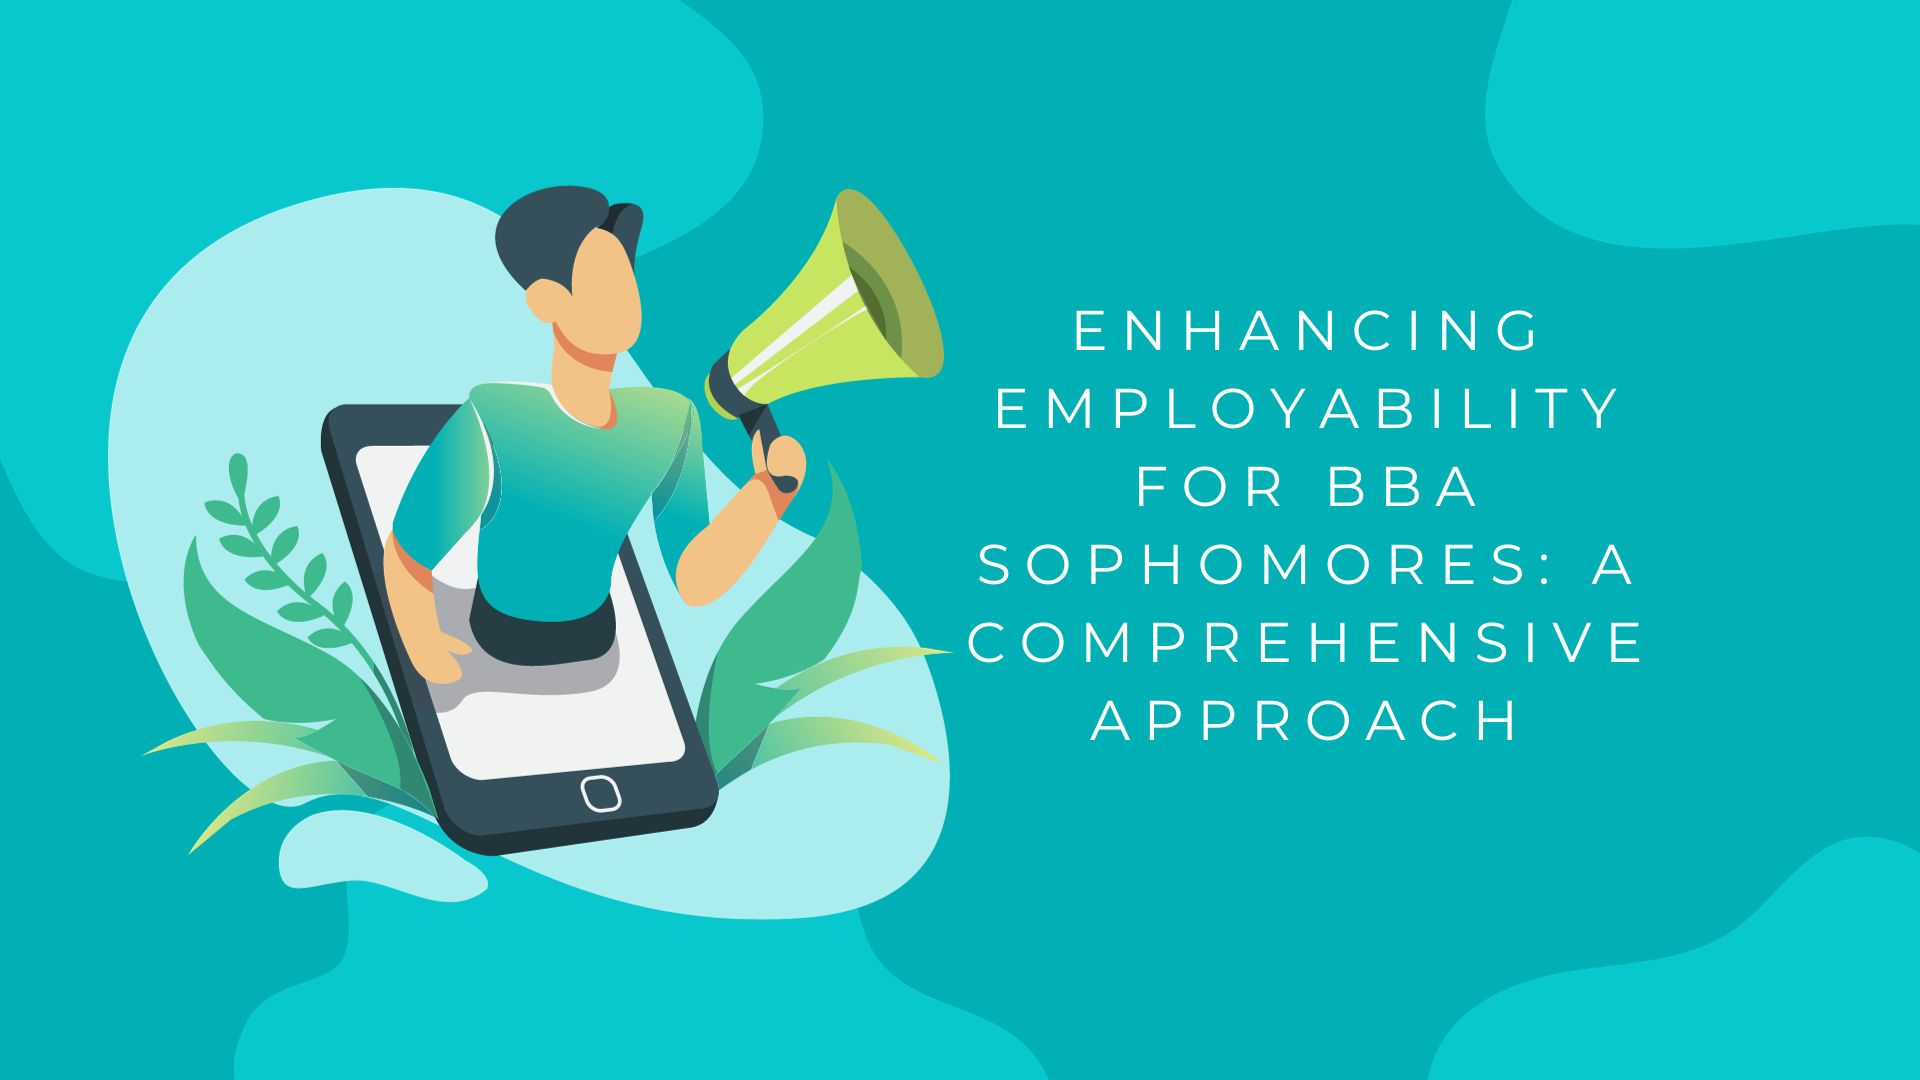 Enhancing Employability for BBA Sophomores: A Comprehensive Approach